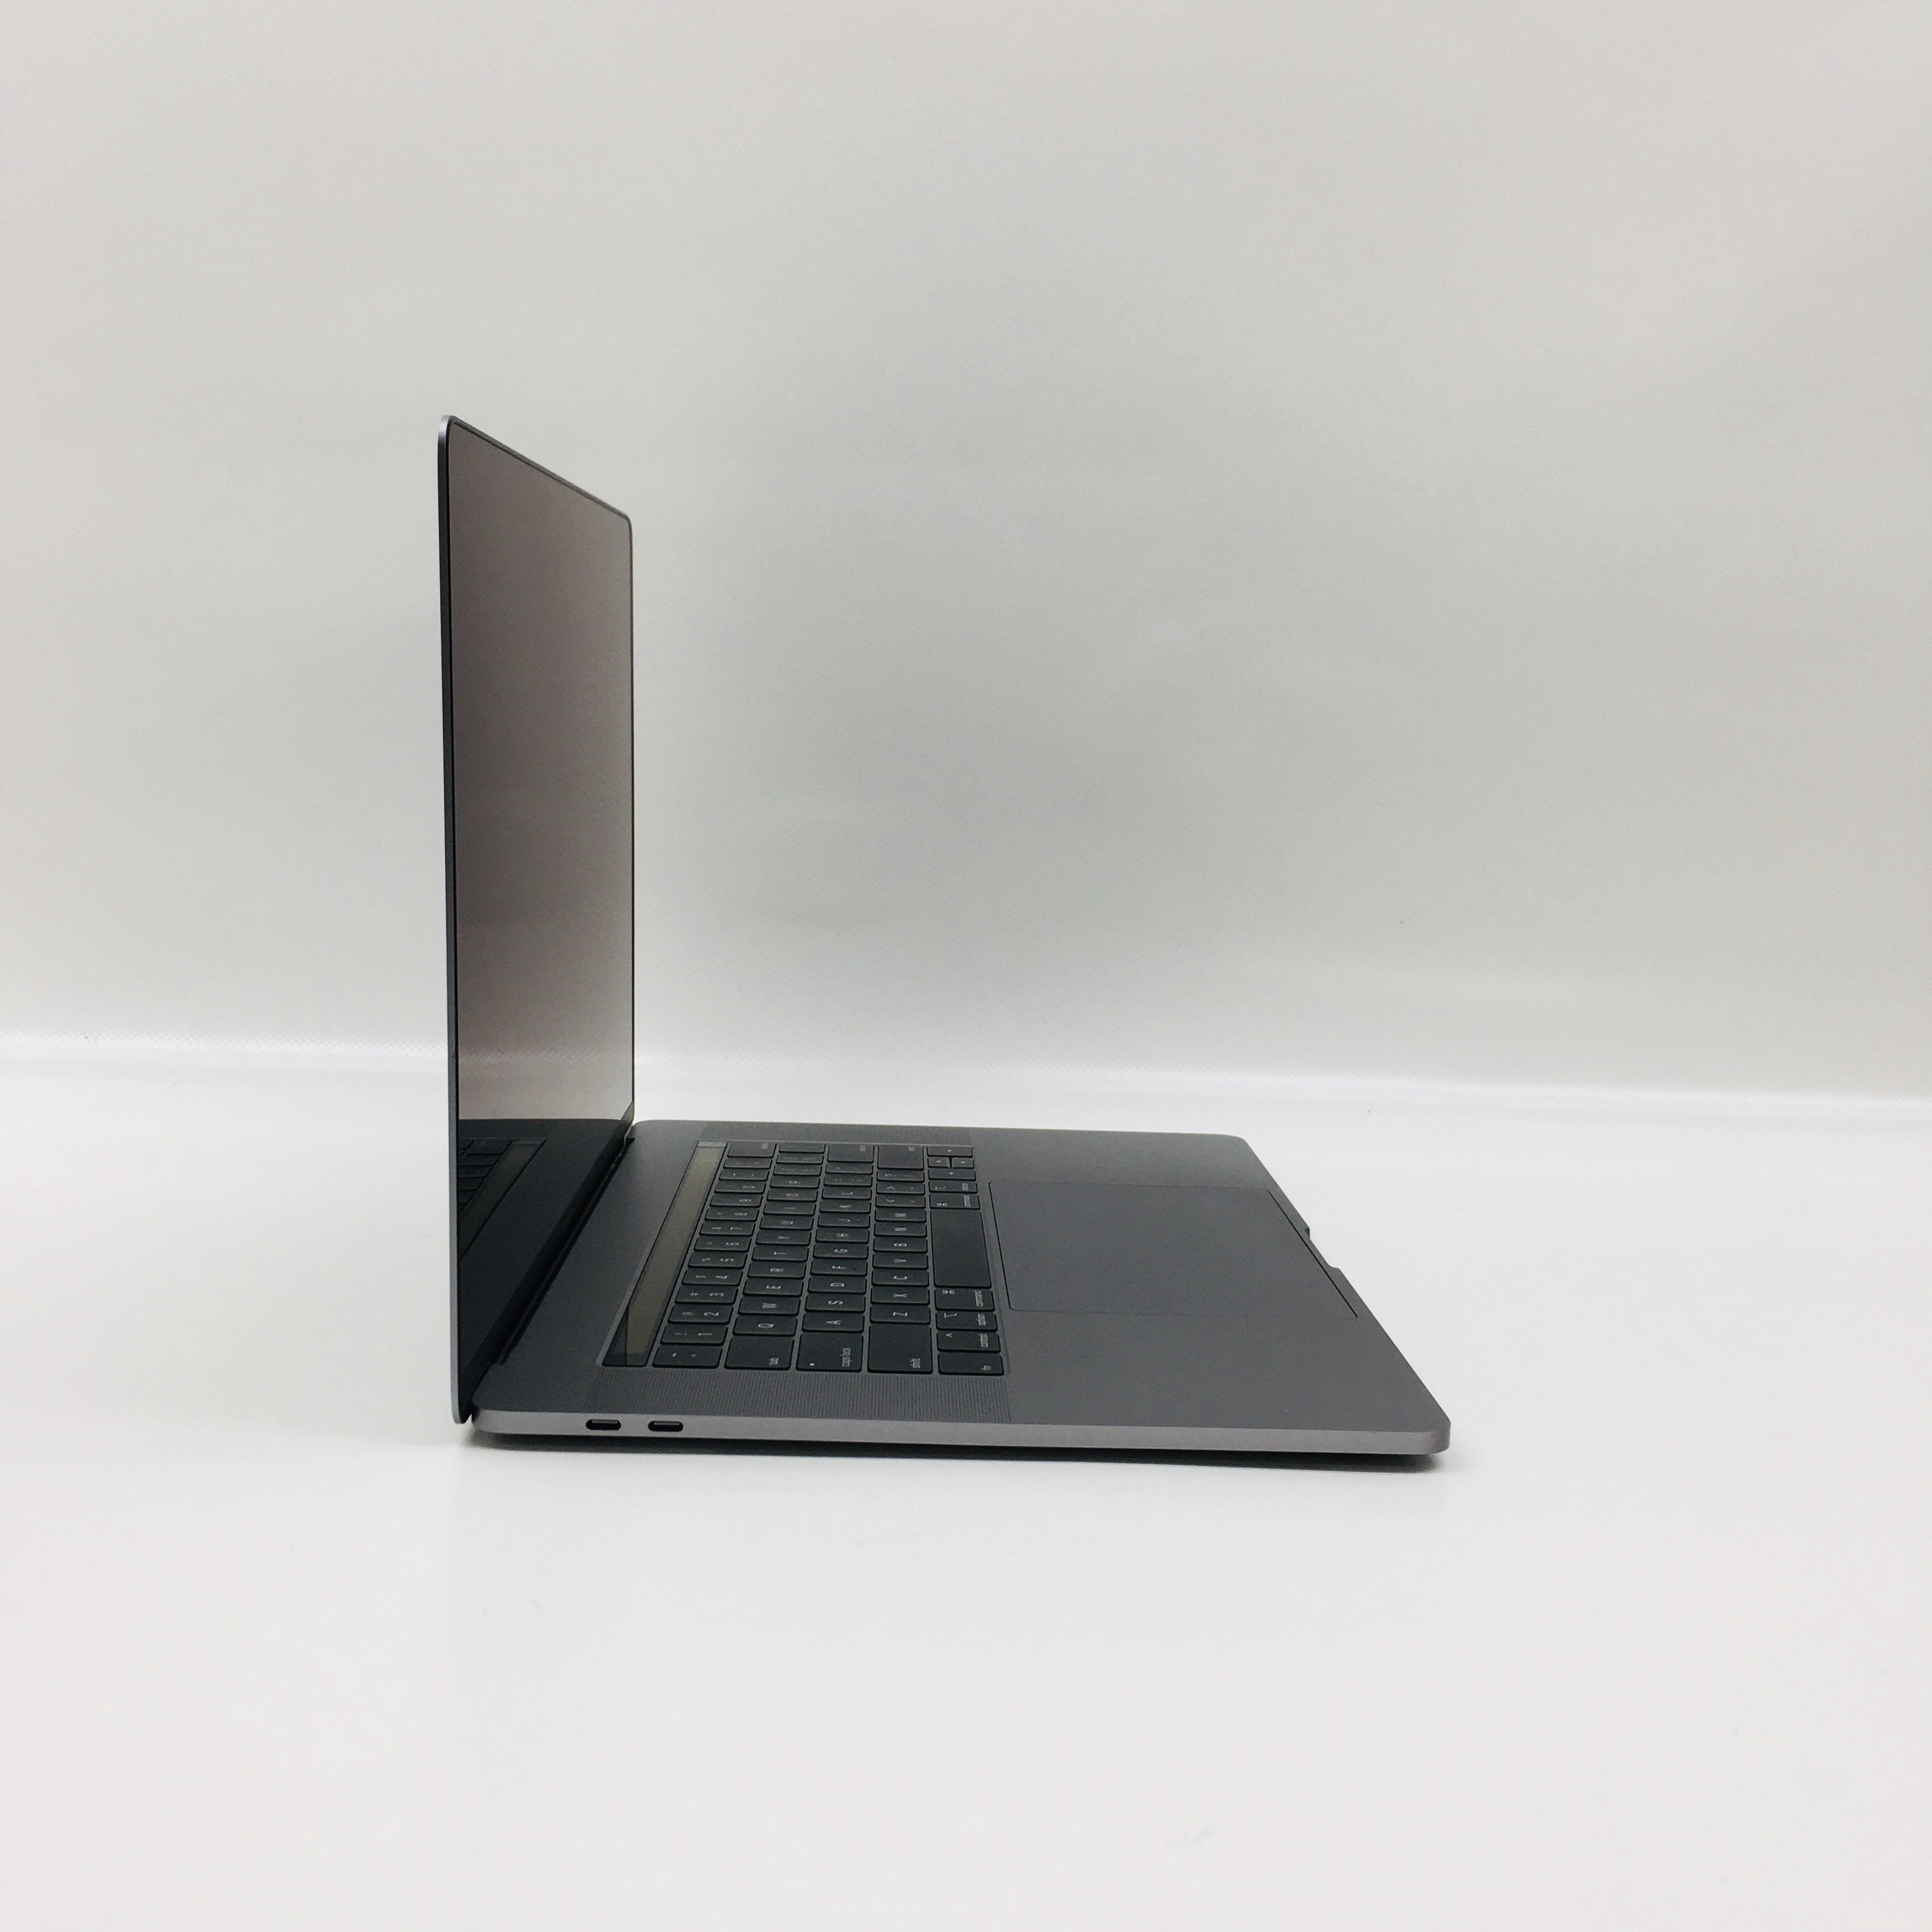 MacBook Pro 15" Touch Bar Mid 2018 (Intel 6-Core i7 2.6 GHz 16 GB RAM 512 GB SSD), Space Gray, Intel 6-Core i7 2.6 GHz, 16 GB RAM, 512 GB SSD, image 2